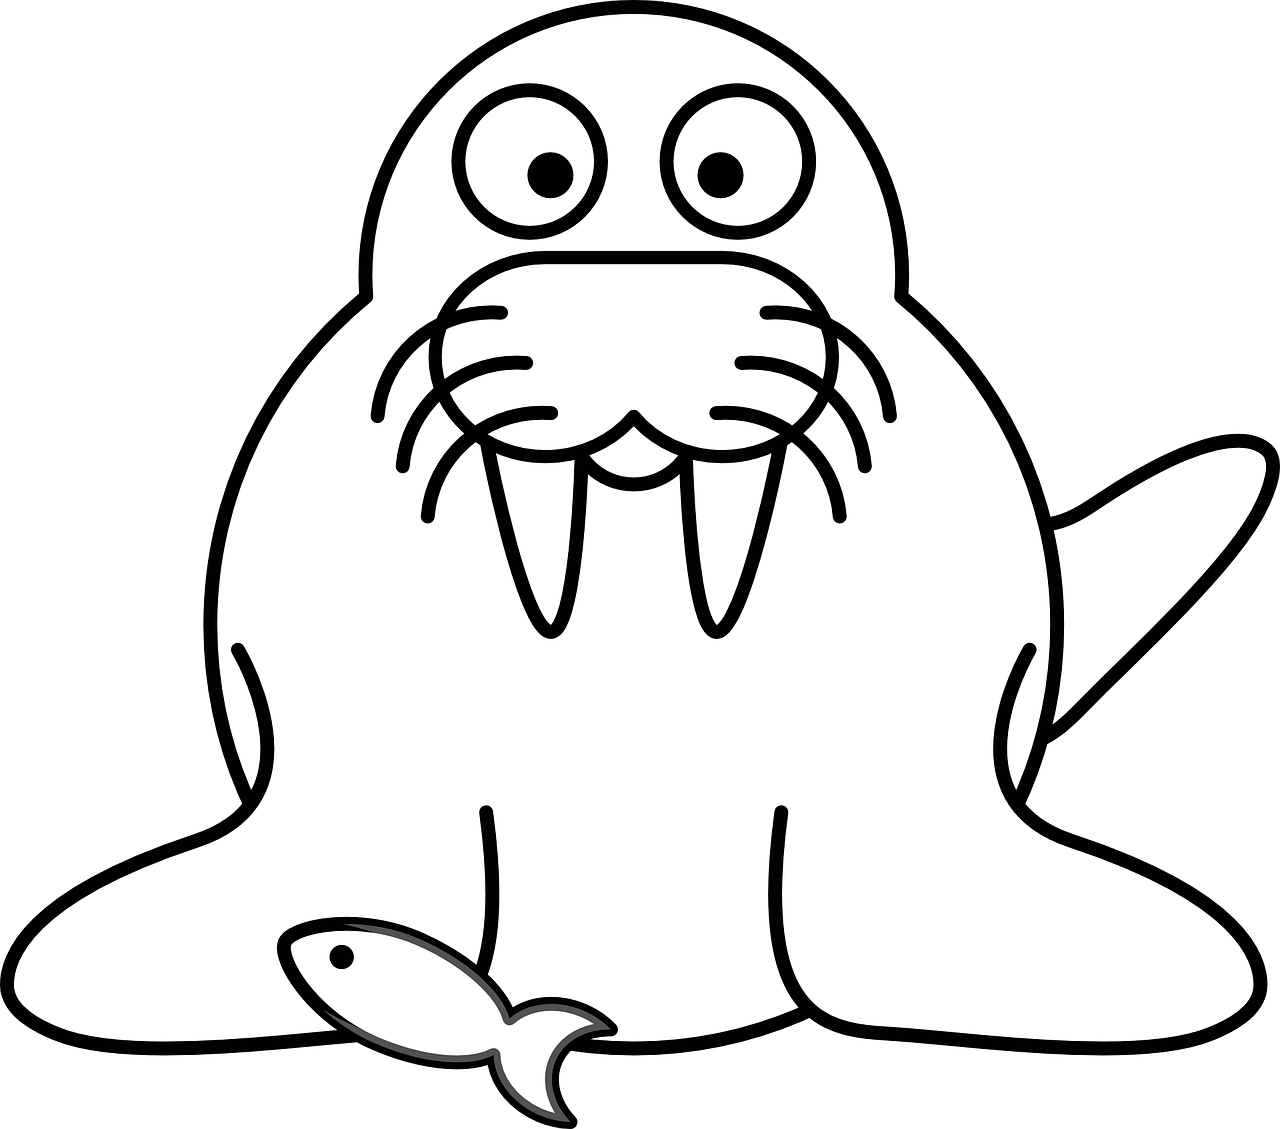 a waline with a fish in its mouth, lineart, pixabay contest winner, hurufiyya, seals, black backround. inkscape, peter griffin face, cute single animal